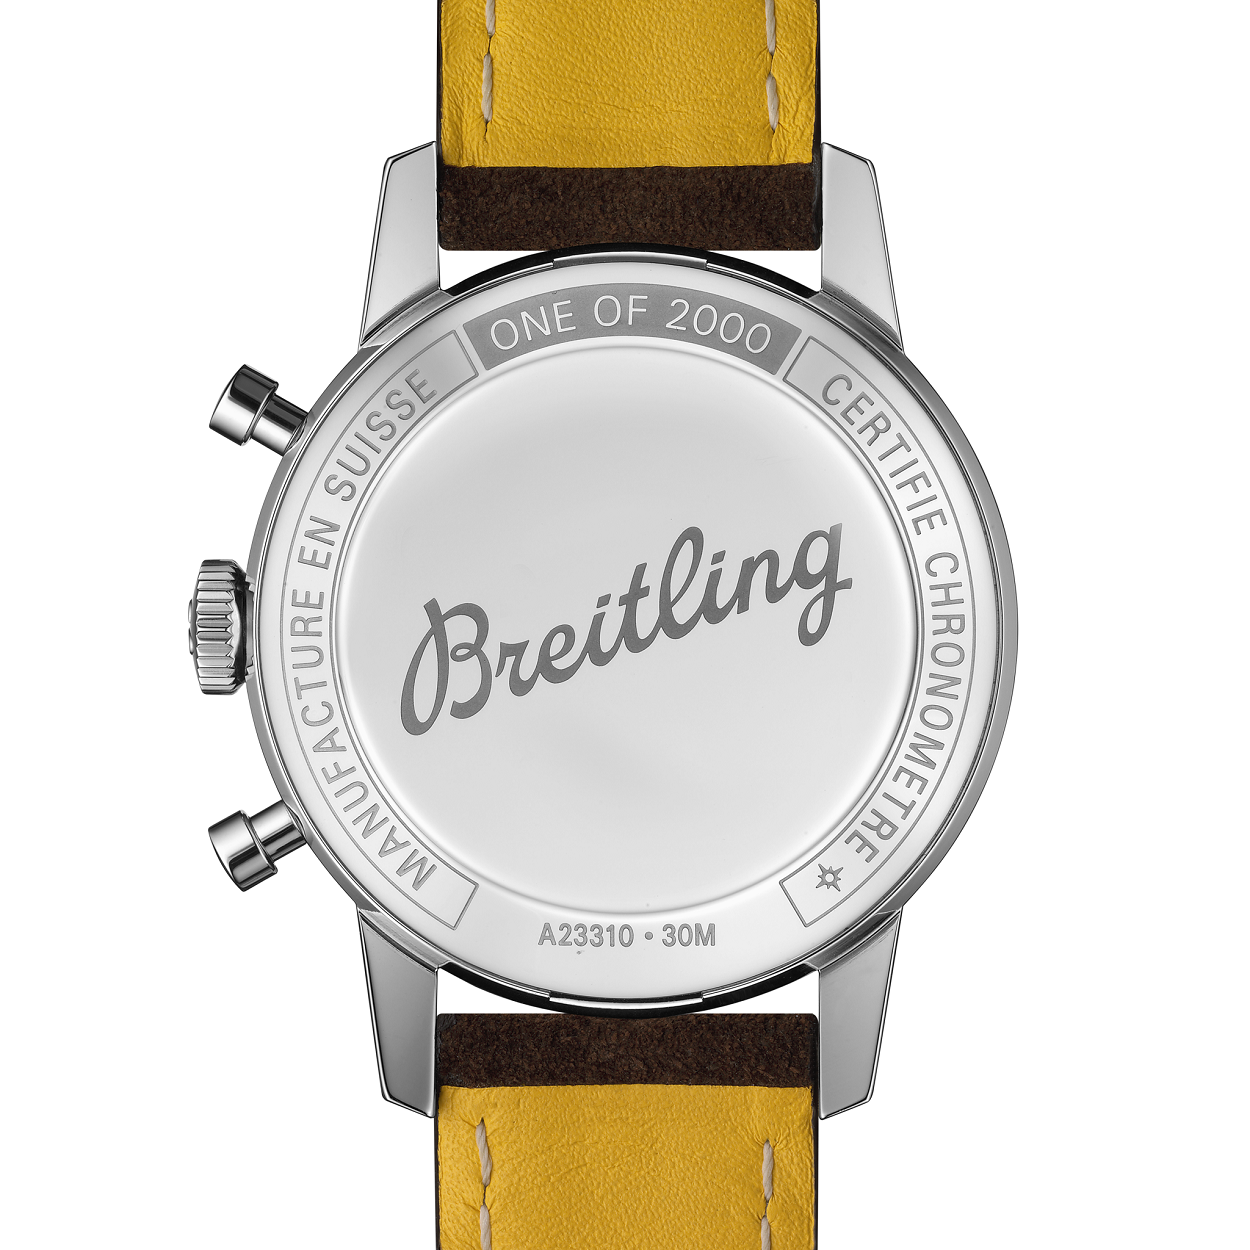 Breitling Top Time